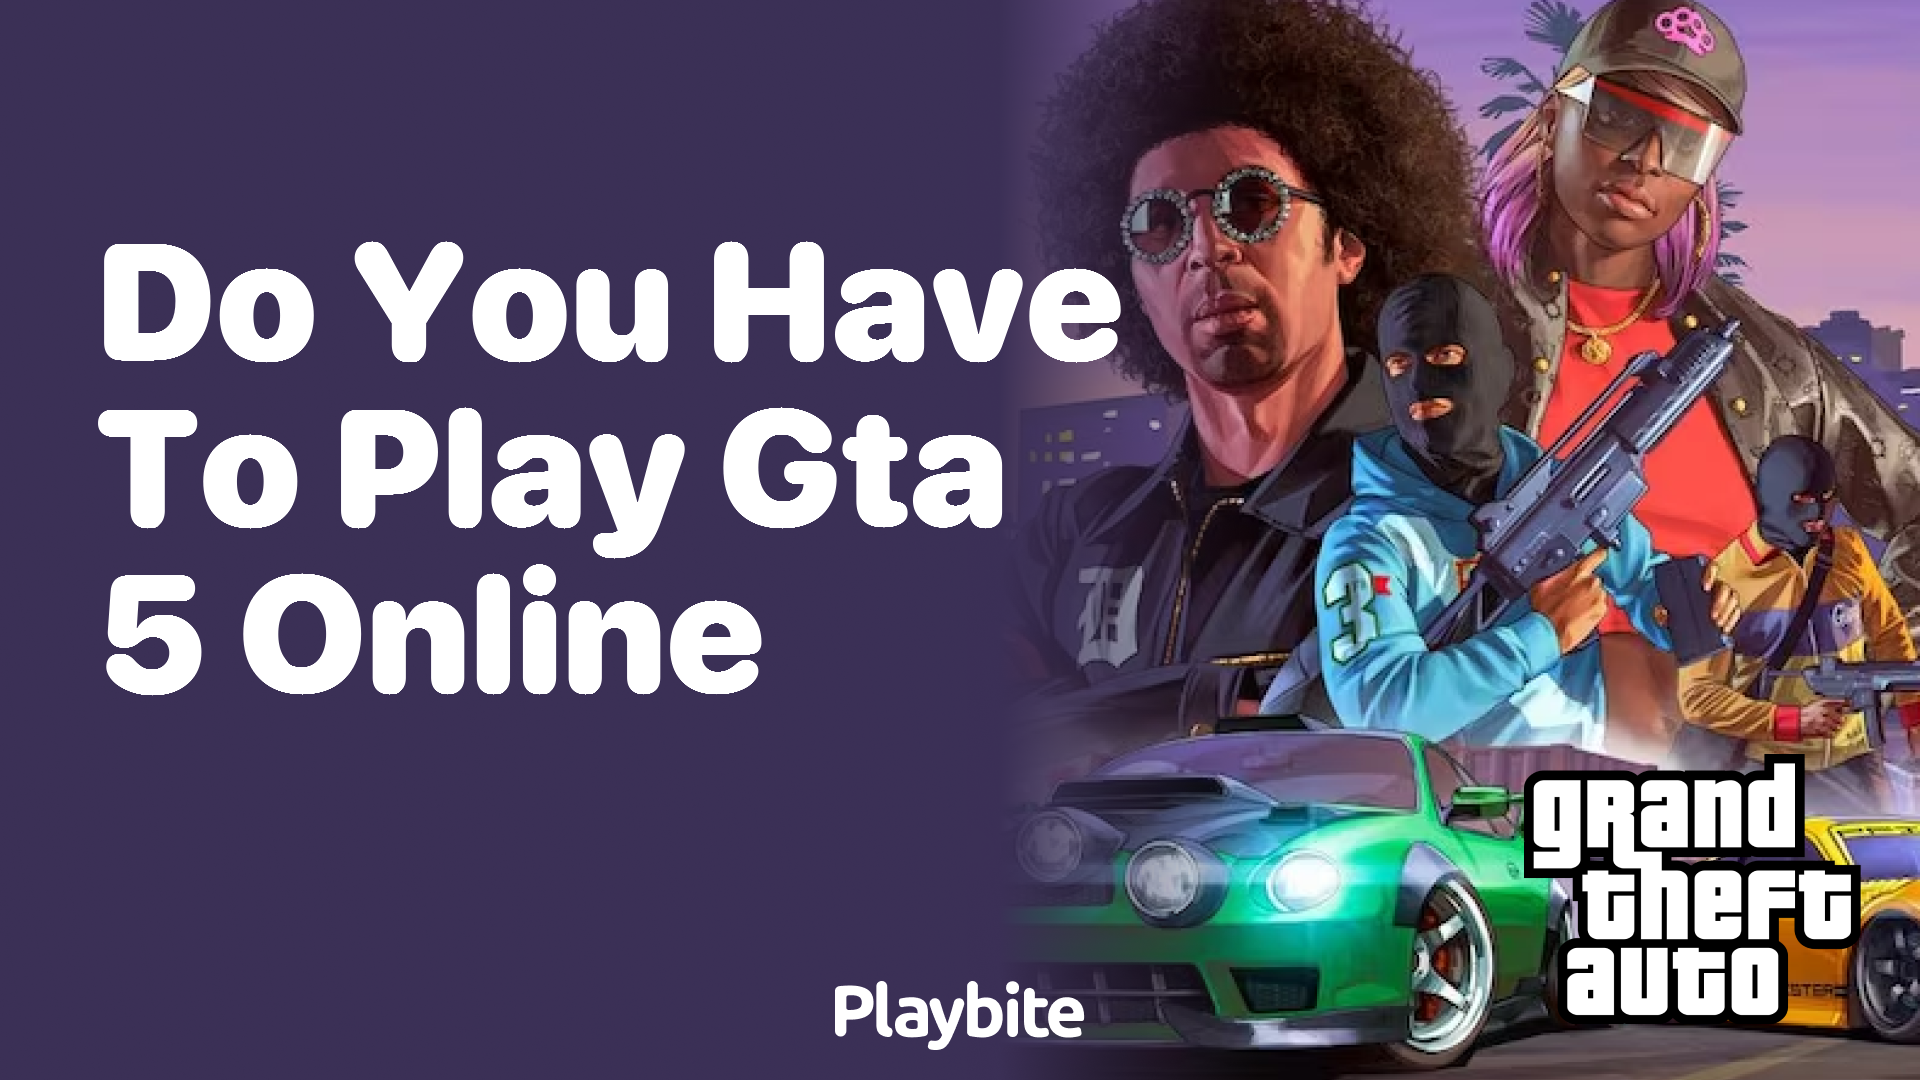 Do you have to play GTA 5 online?